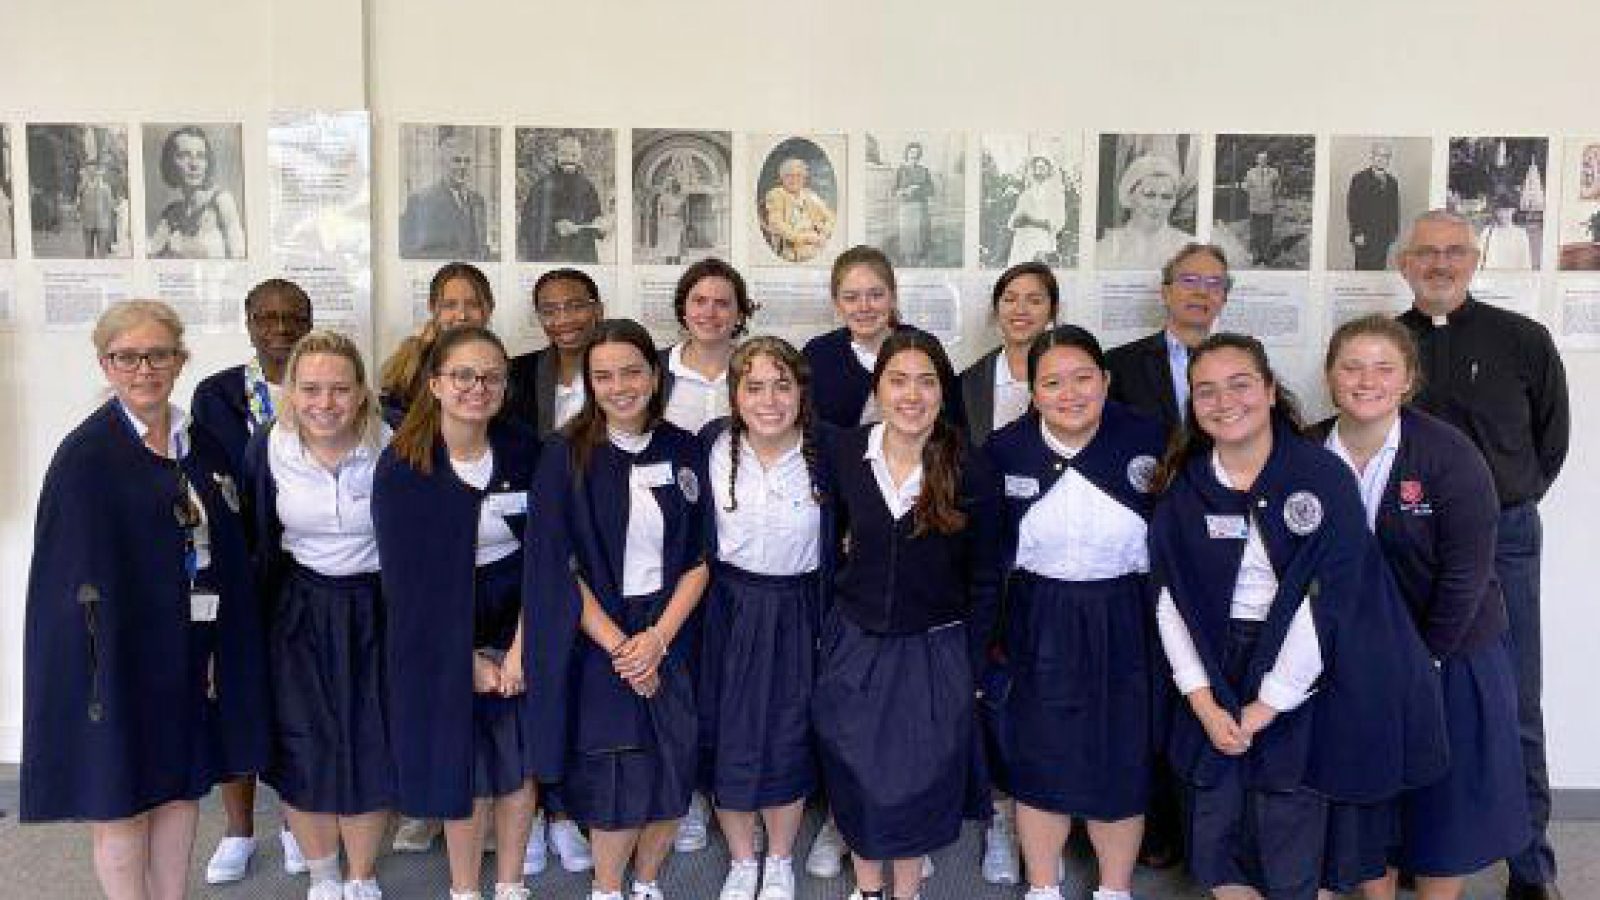 A group of nursing students pose together while on an immersion trip to Lourdes, France in June.